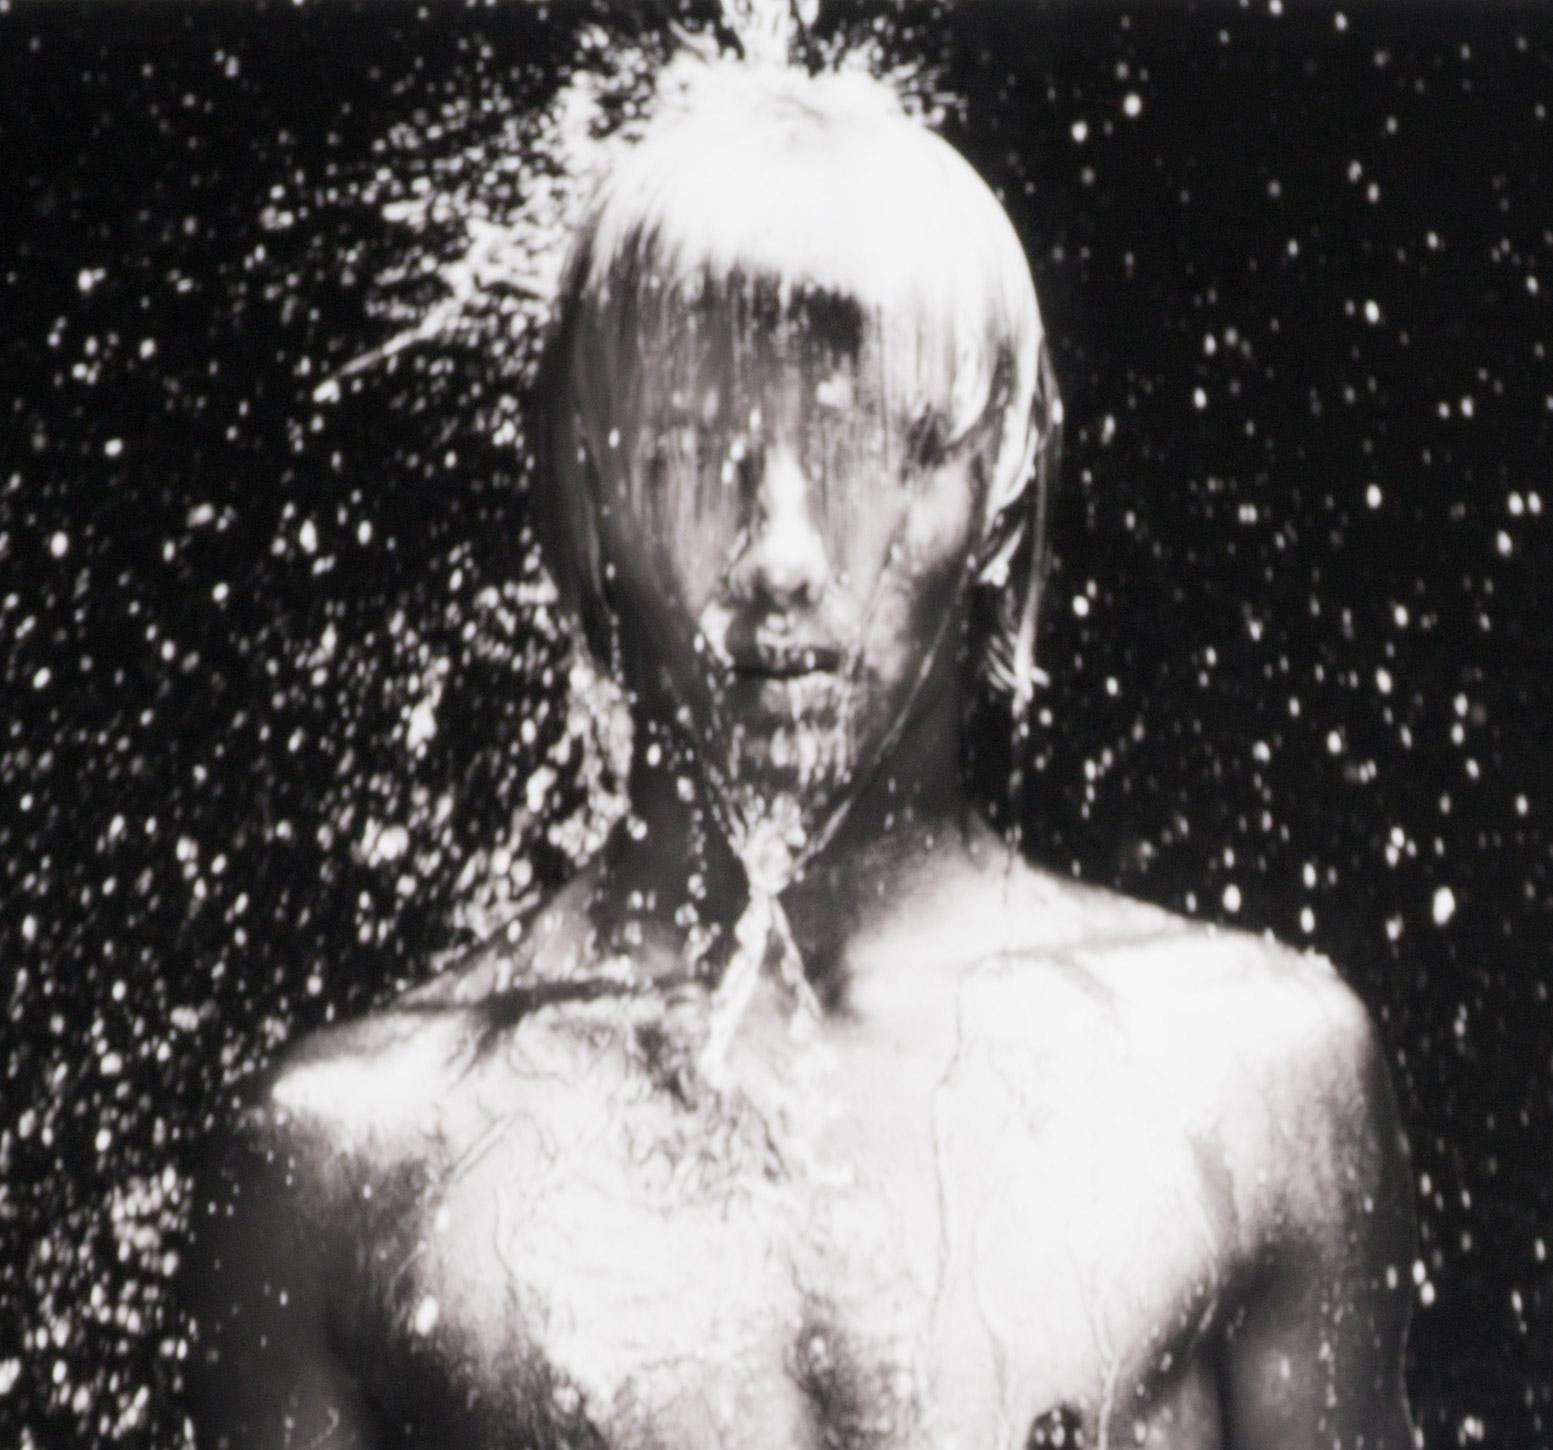 WET 11 (young nude Dutch boy being doused by droplets of water) - Photograph by Benno Thoma